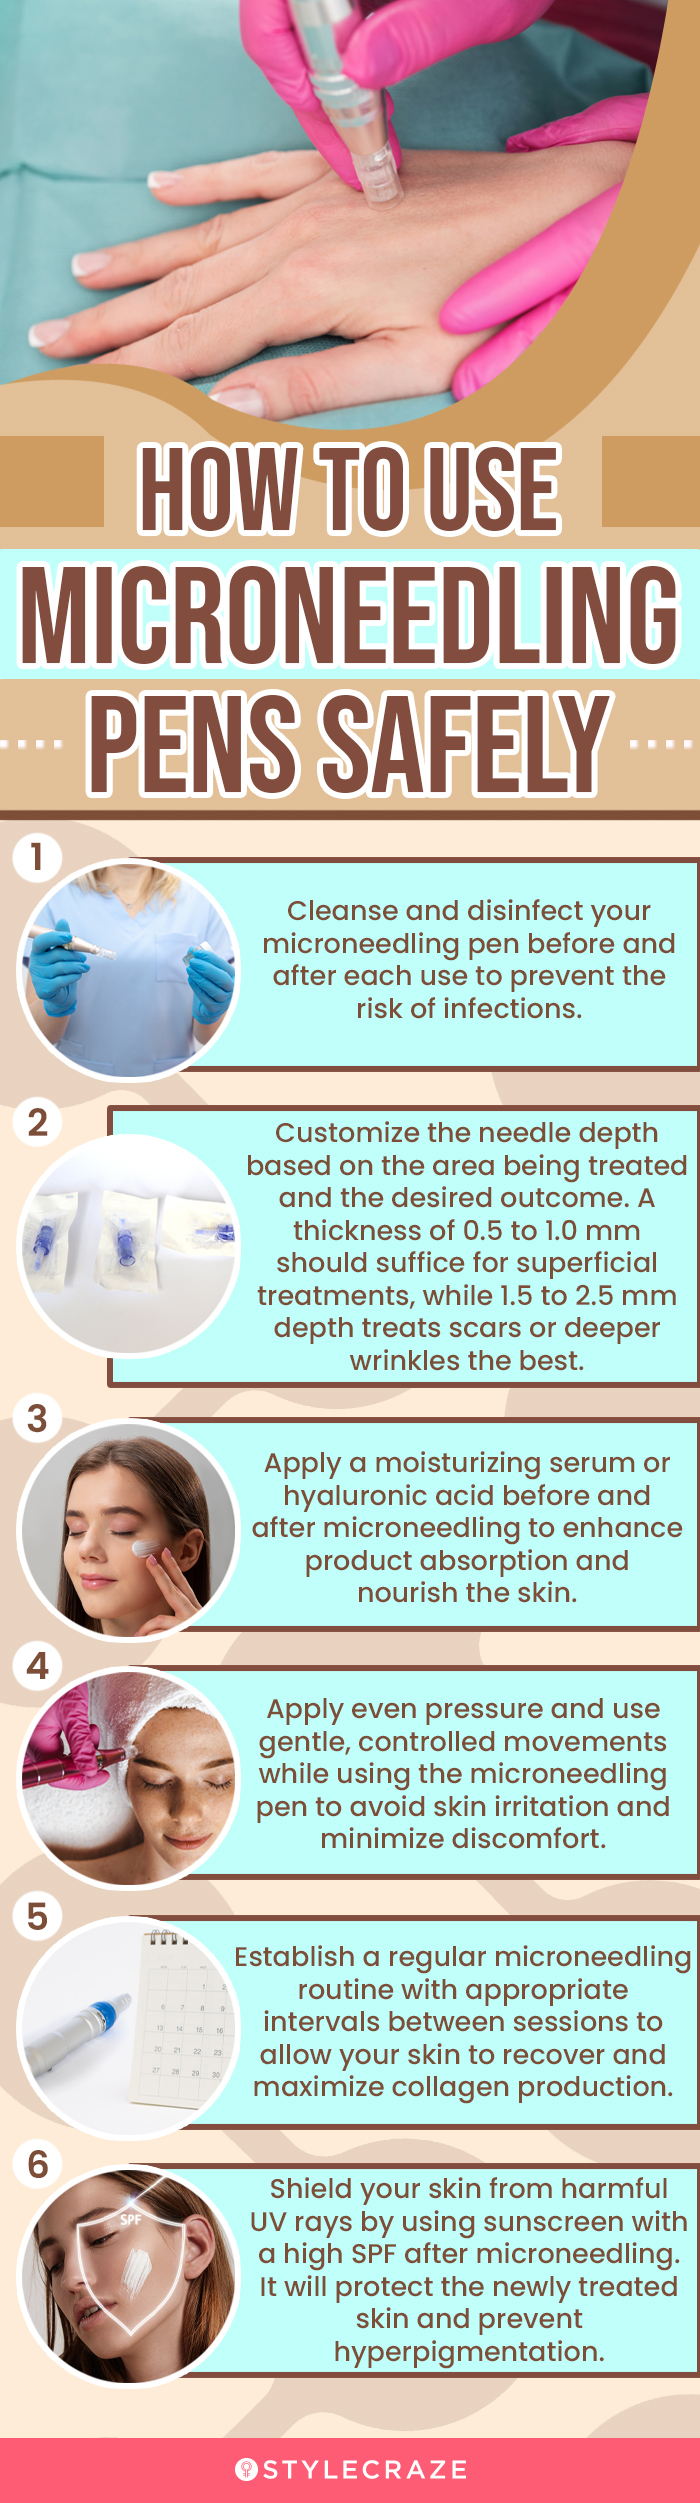 How To Use Microneedling Pens Safely (infographic)